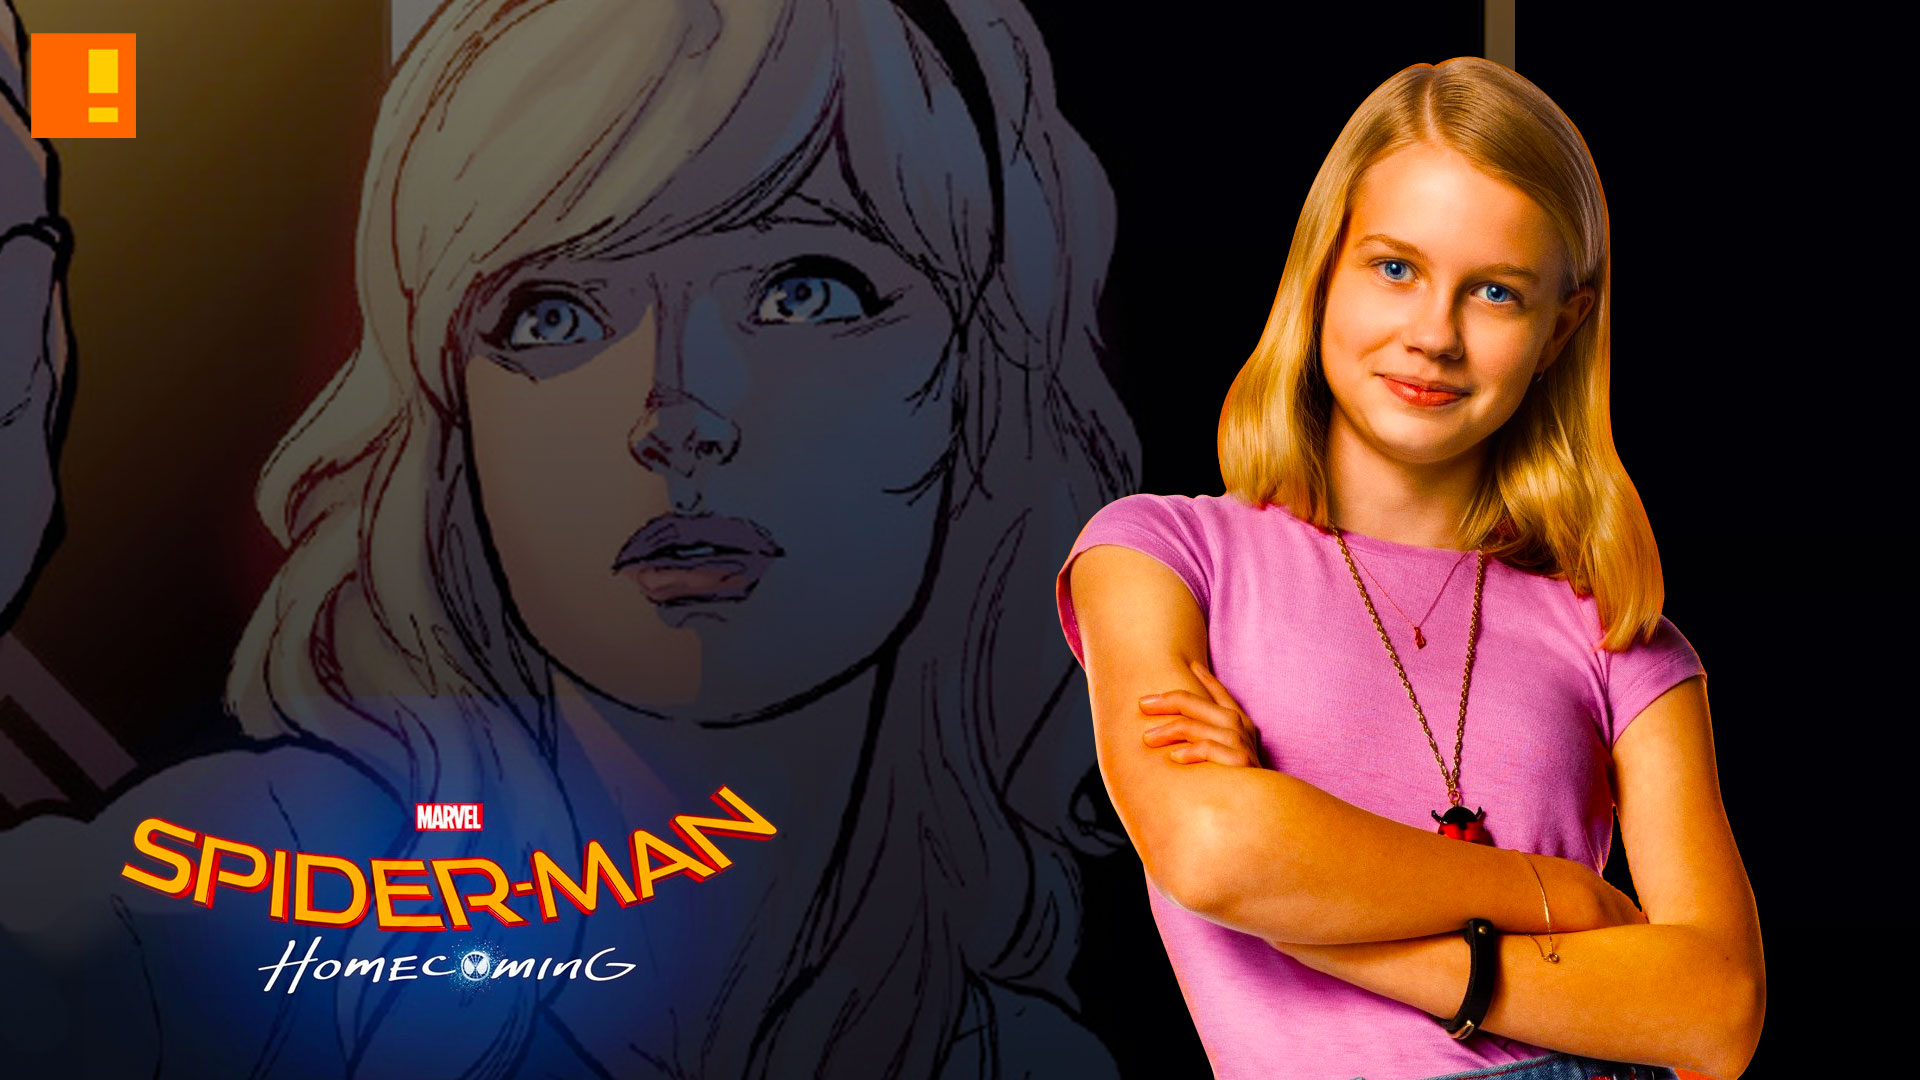 spiderman, spider-man, spider-man: homecoming, Angourie Rice, spiderman homecoming, spider-man homecoming, casting, actor, the nice guys, marvel, marvel comics, spider gwen, gwen stacy, the action pixel